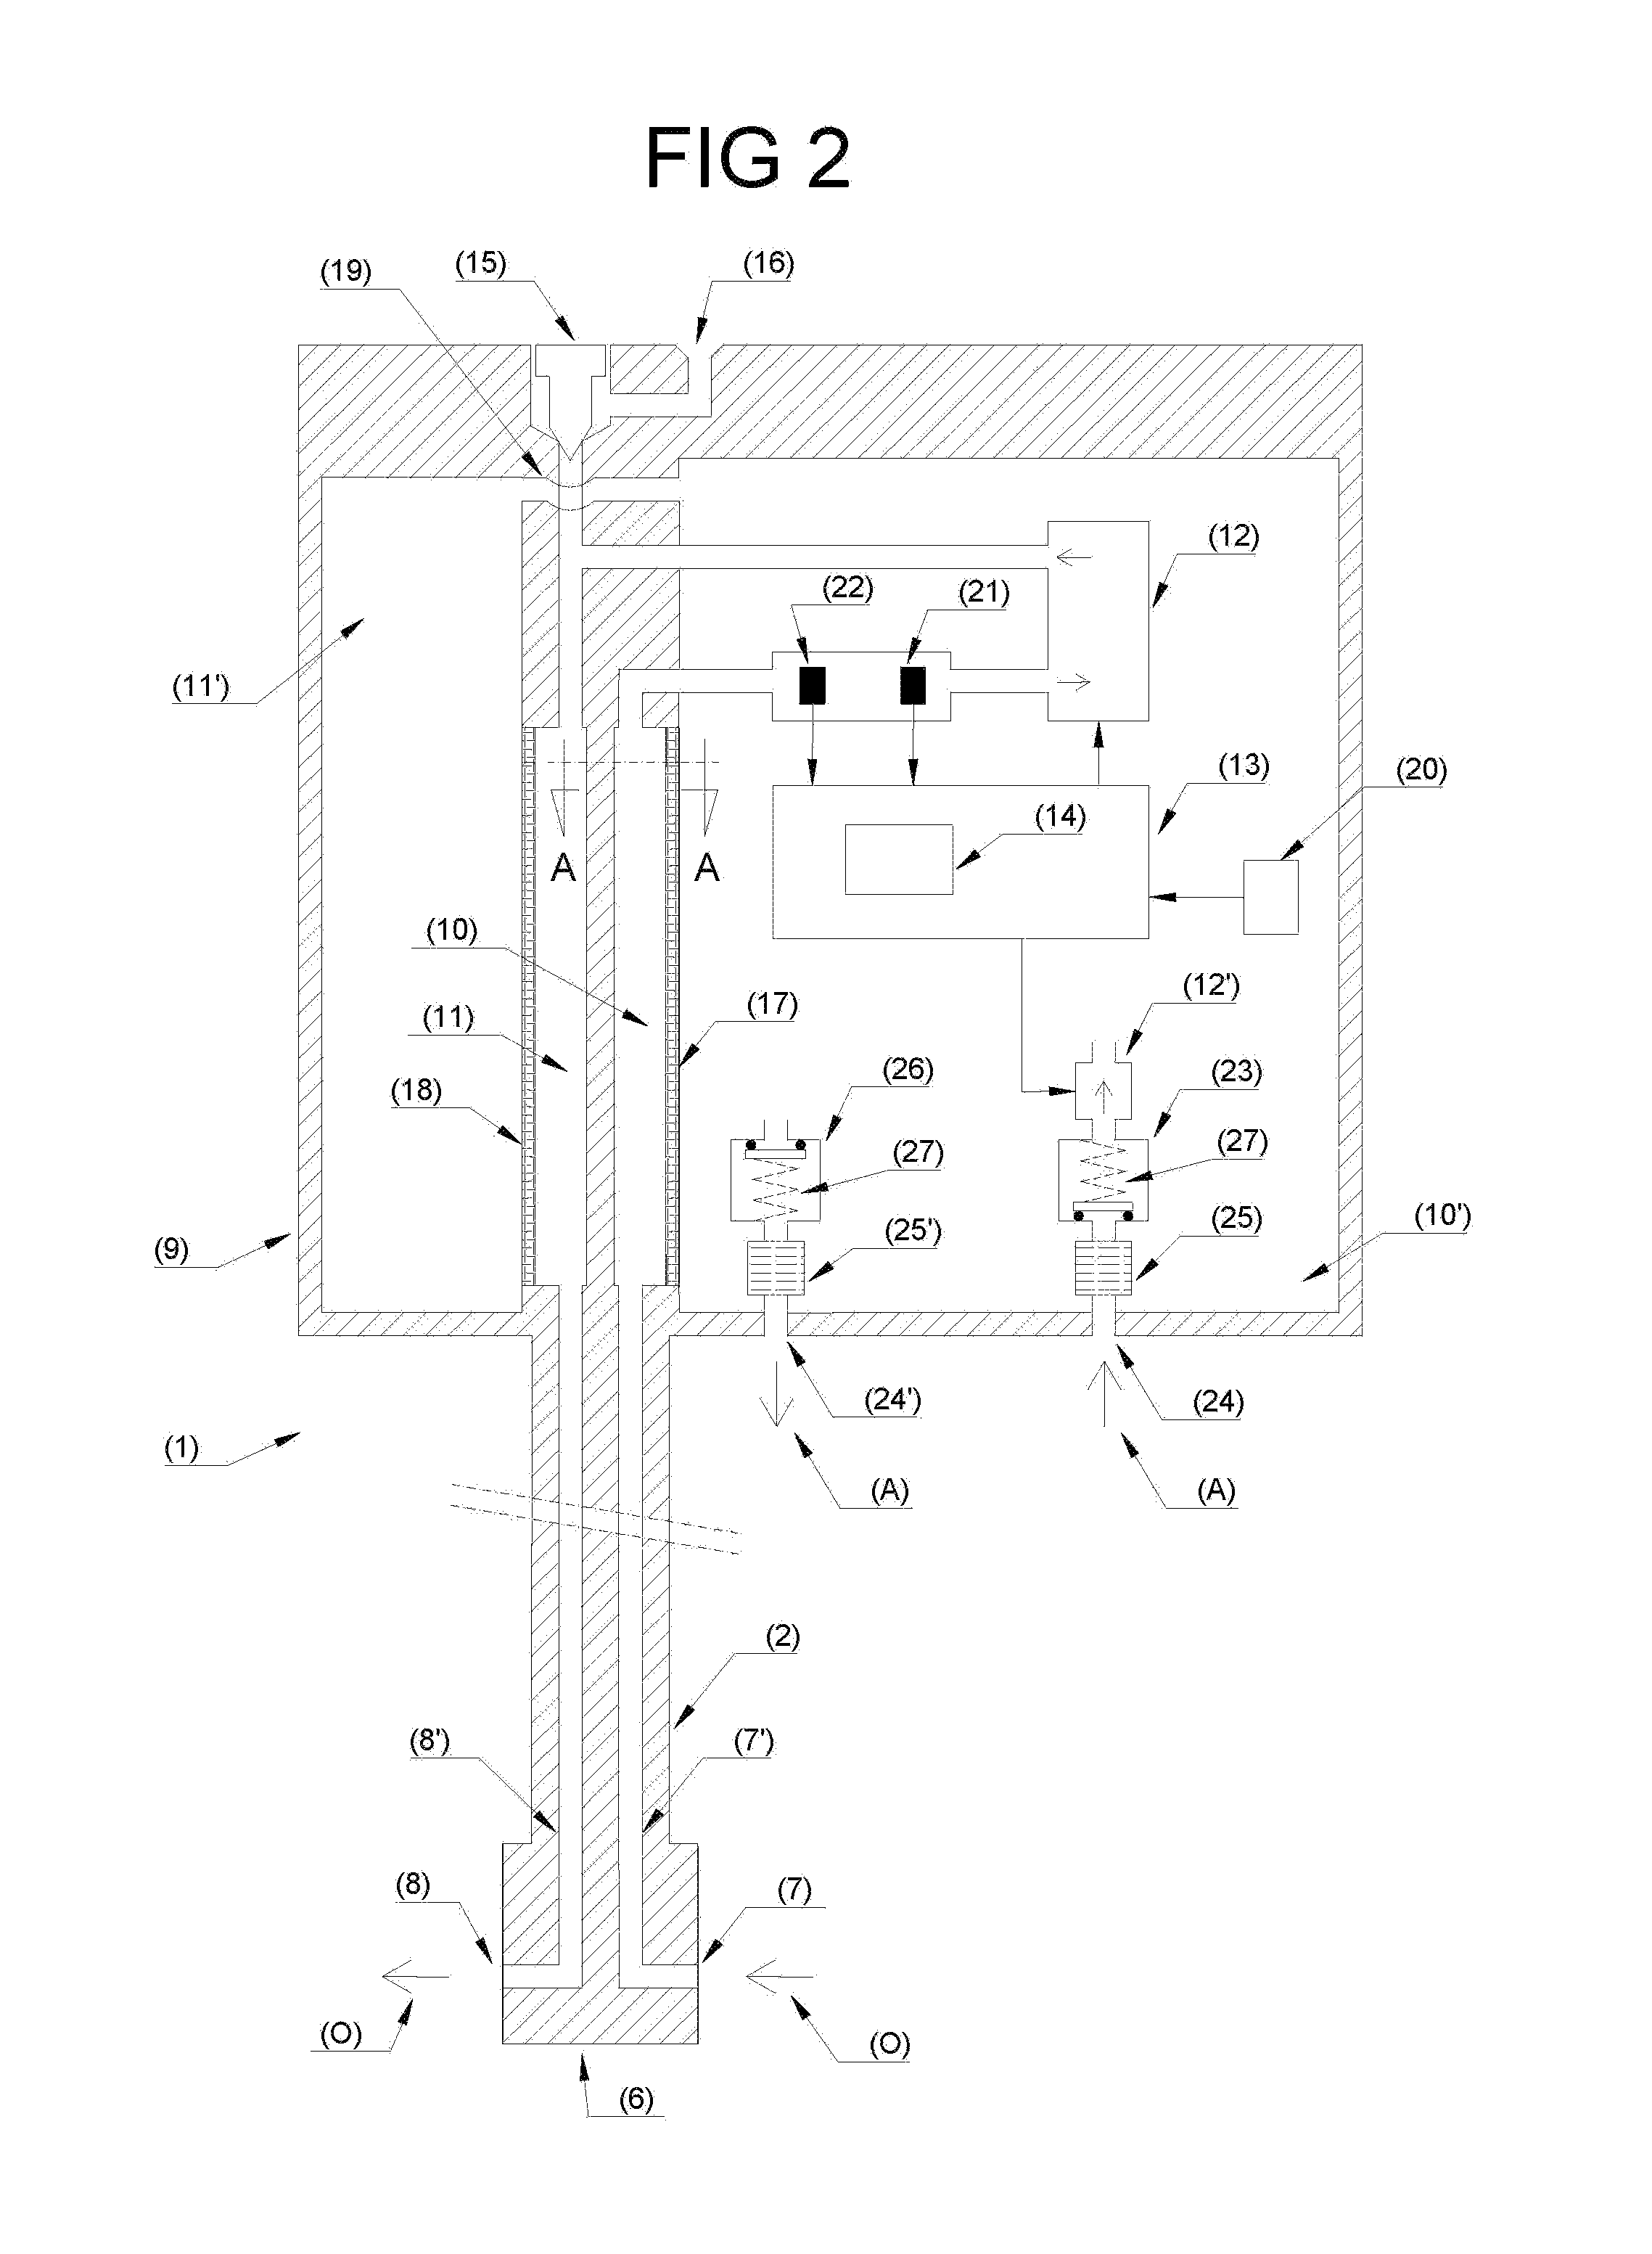 System and method for monitoring dissolved gases in insulating oil of power transformers, reactors, on-load tap changers, current transformers, potential transformers, condensive bushings as well as similar high voltage equipments immersed in oil